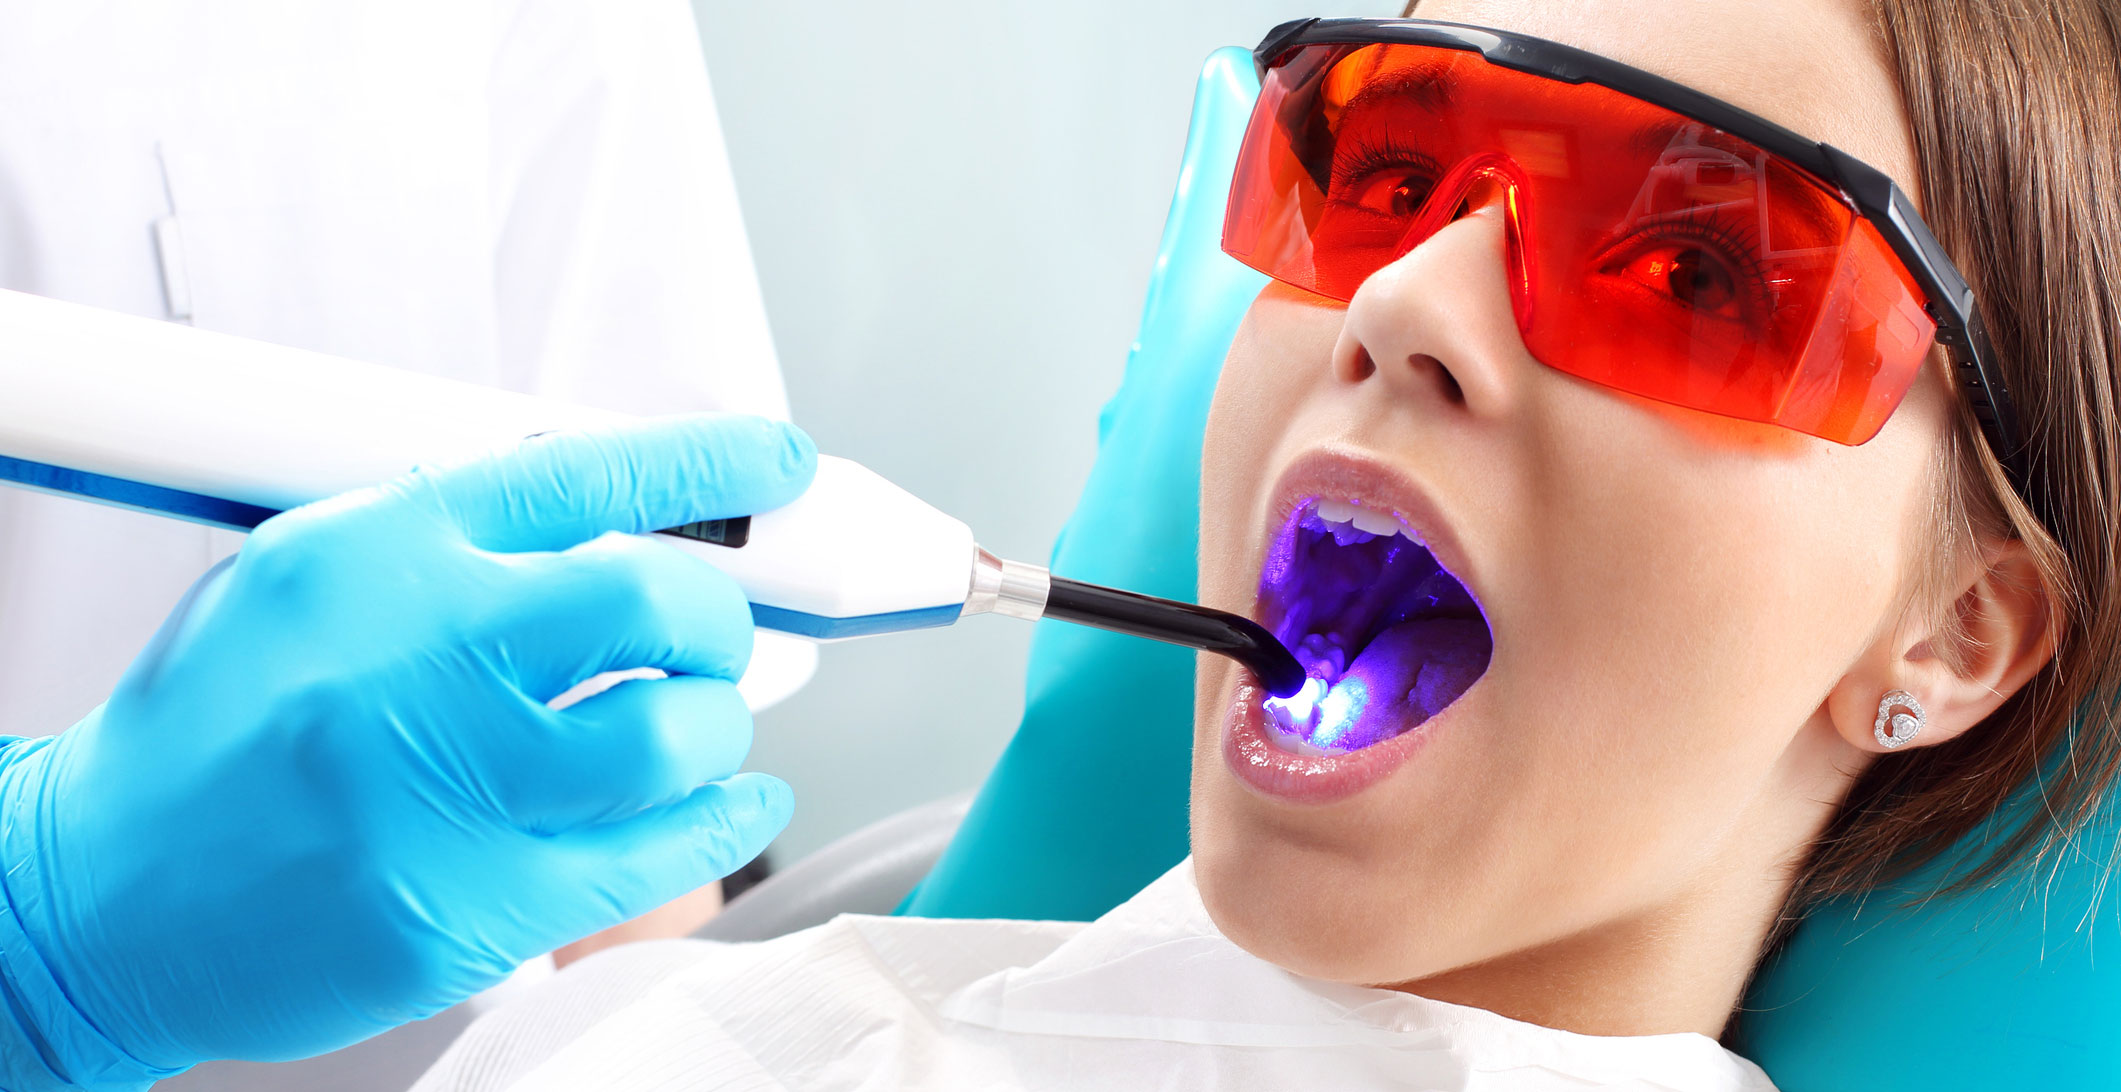 should i worry about my safety with laser dentistry procedures